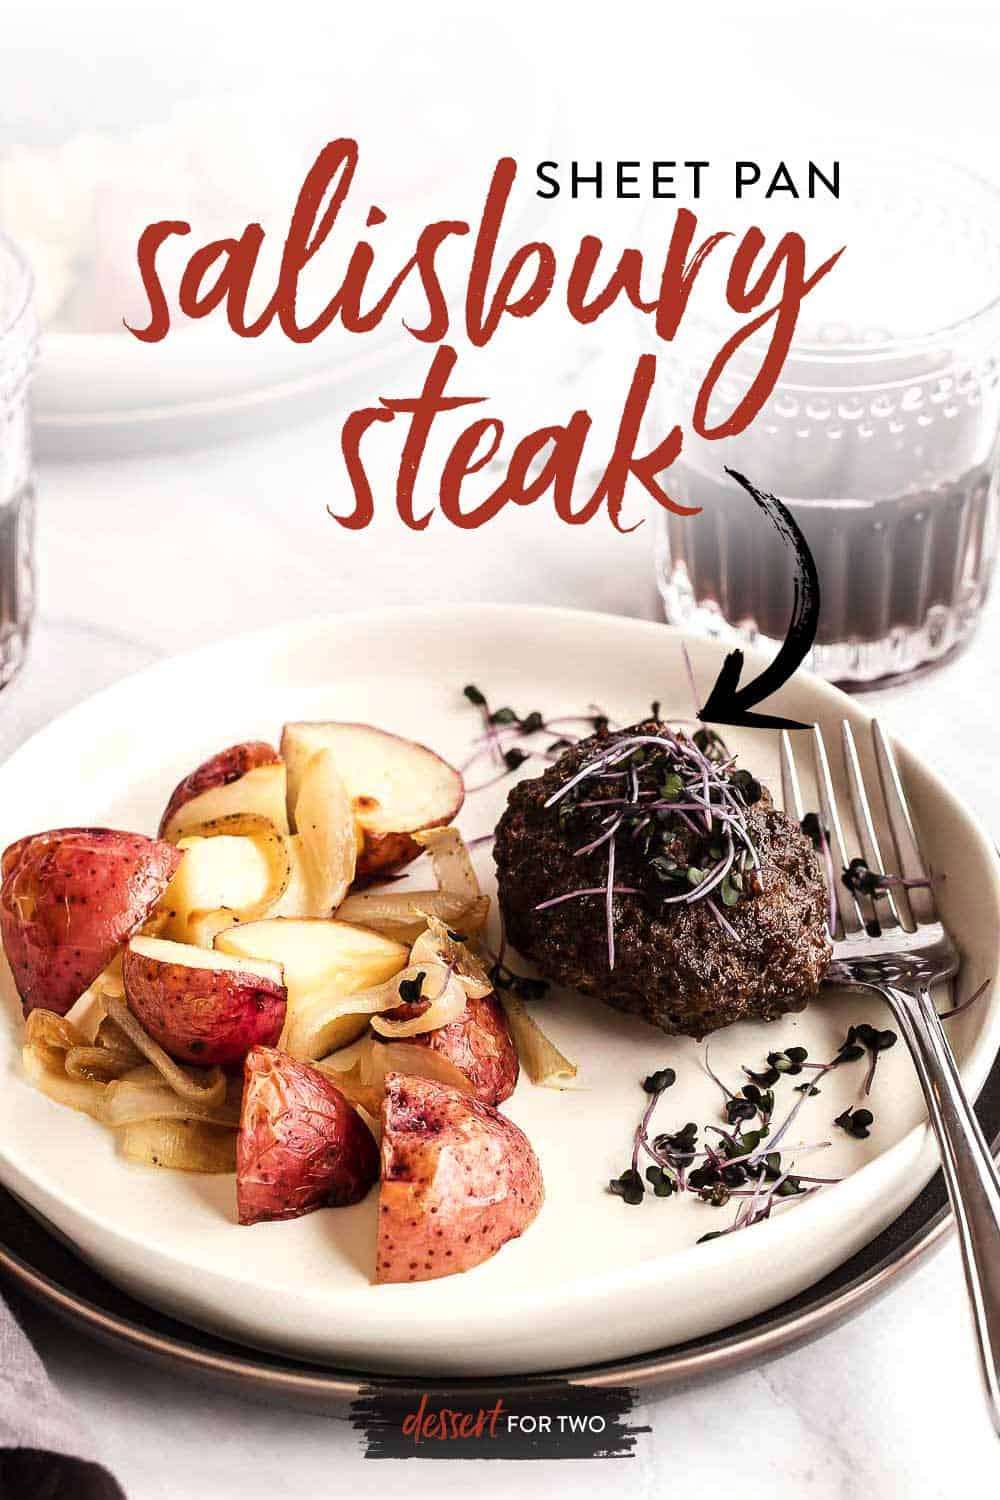 Salisbury steak easy recipe! Sheet pan salisbury steak with potatoes. I love this one pan meal made on a sheet pan. Hamburger steaks are so great and easy!